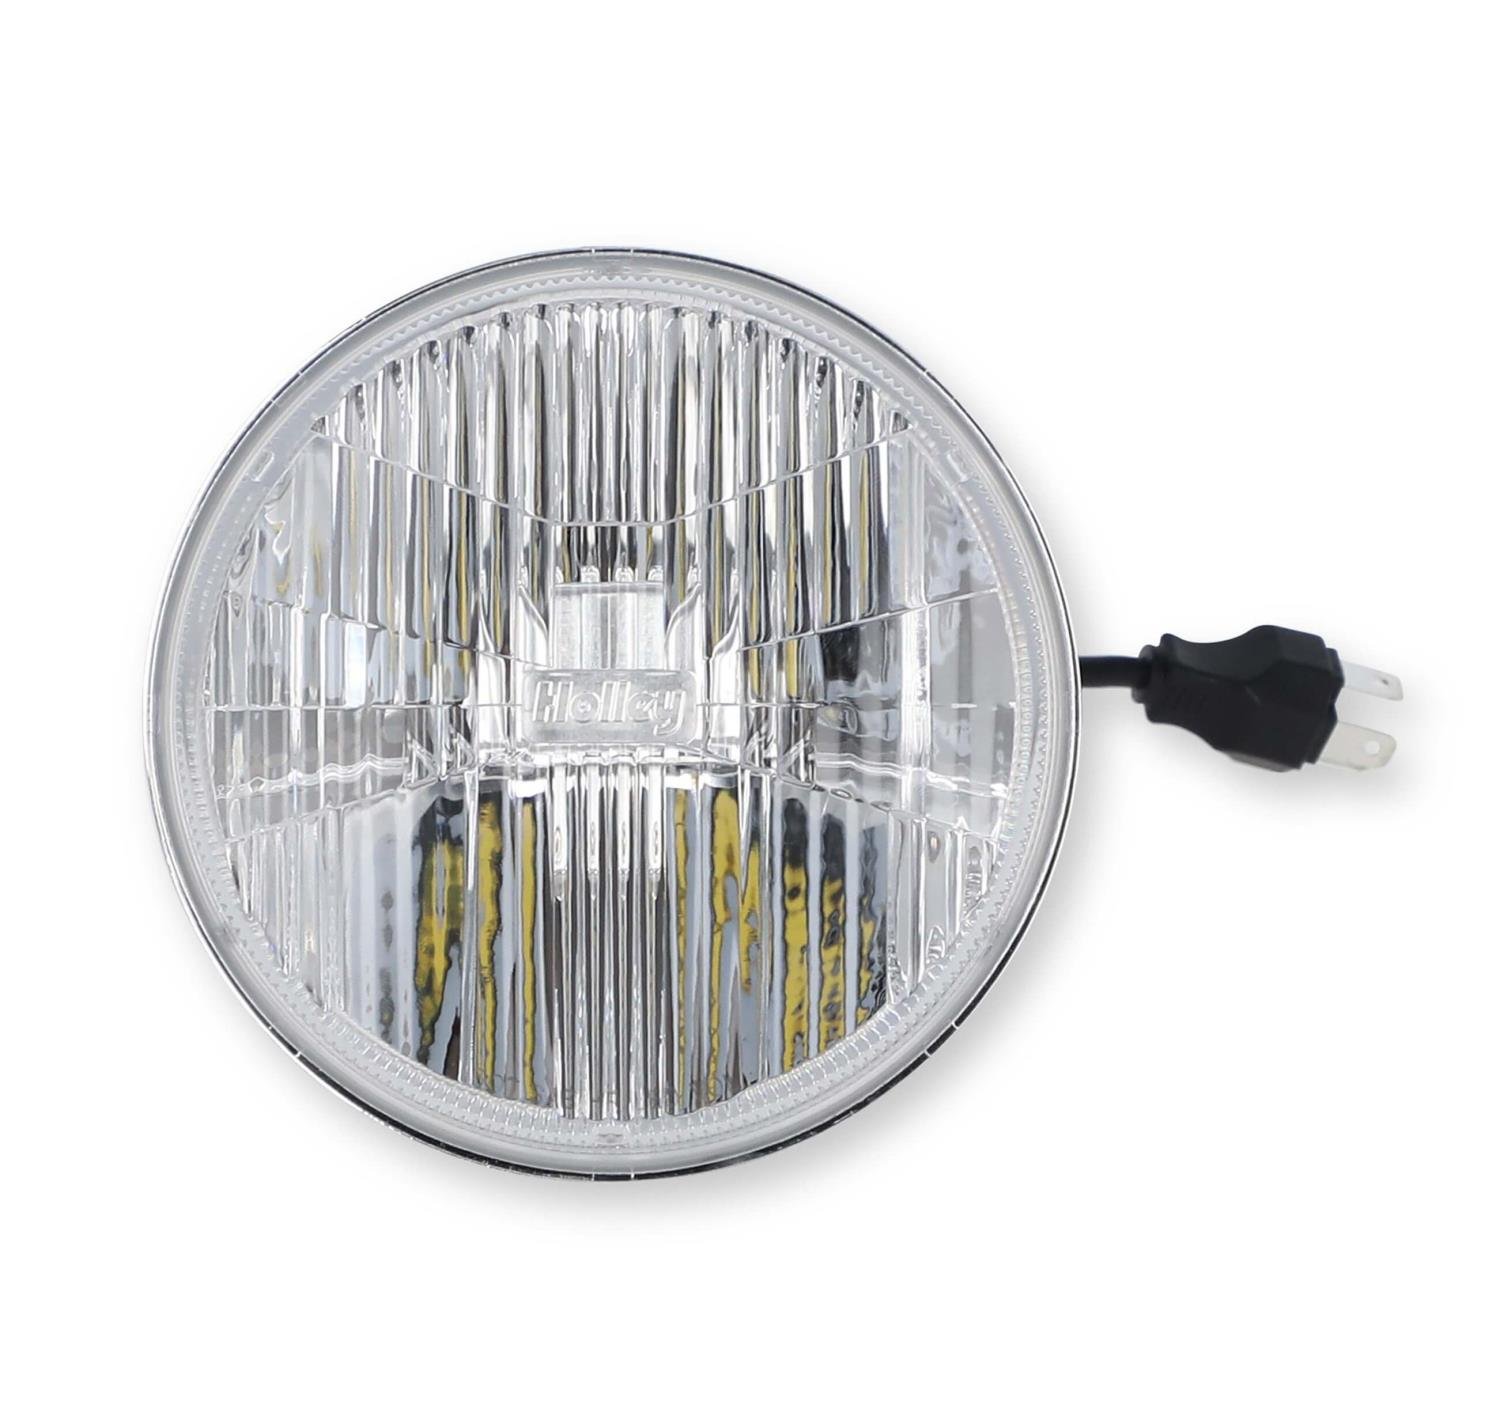 LFRB125 RetroBright LED 5 3/4 in. Round Headlight for Select 1957-1992 Vehicles with 4-Headlight System [Classic White]